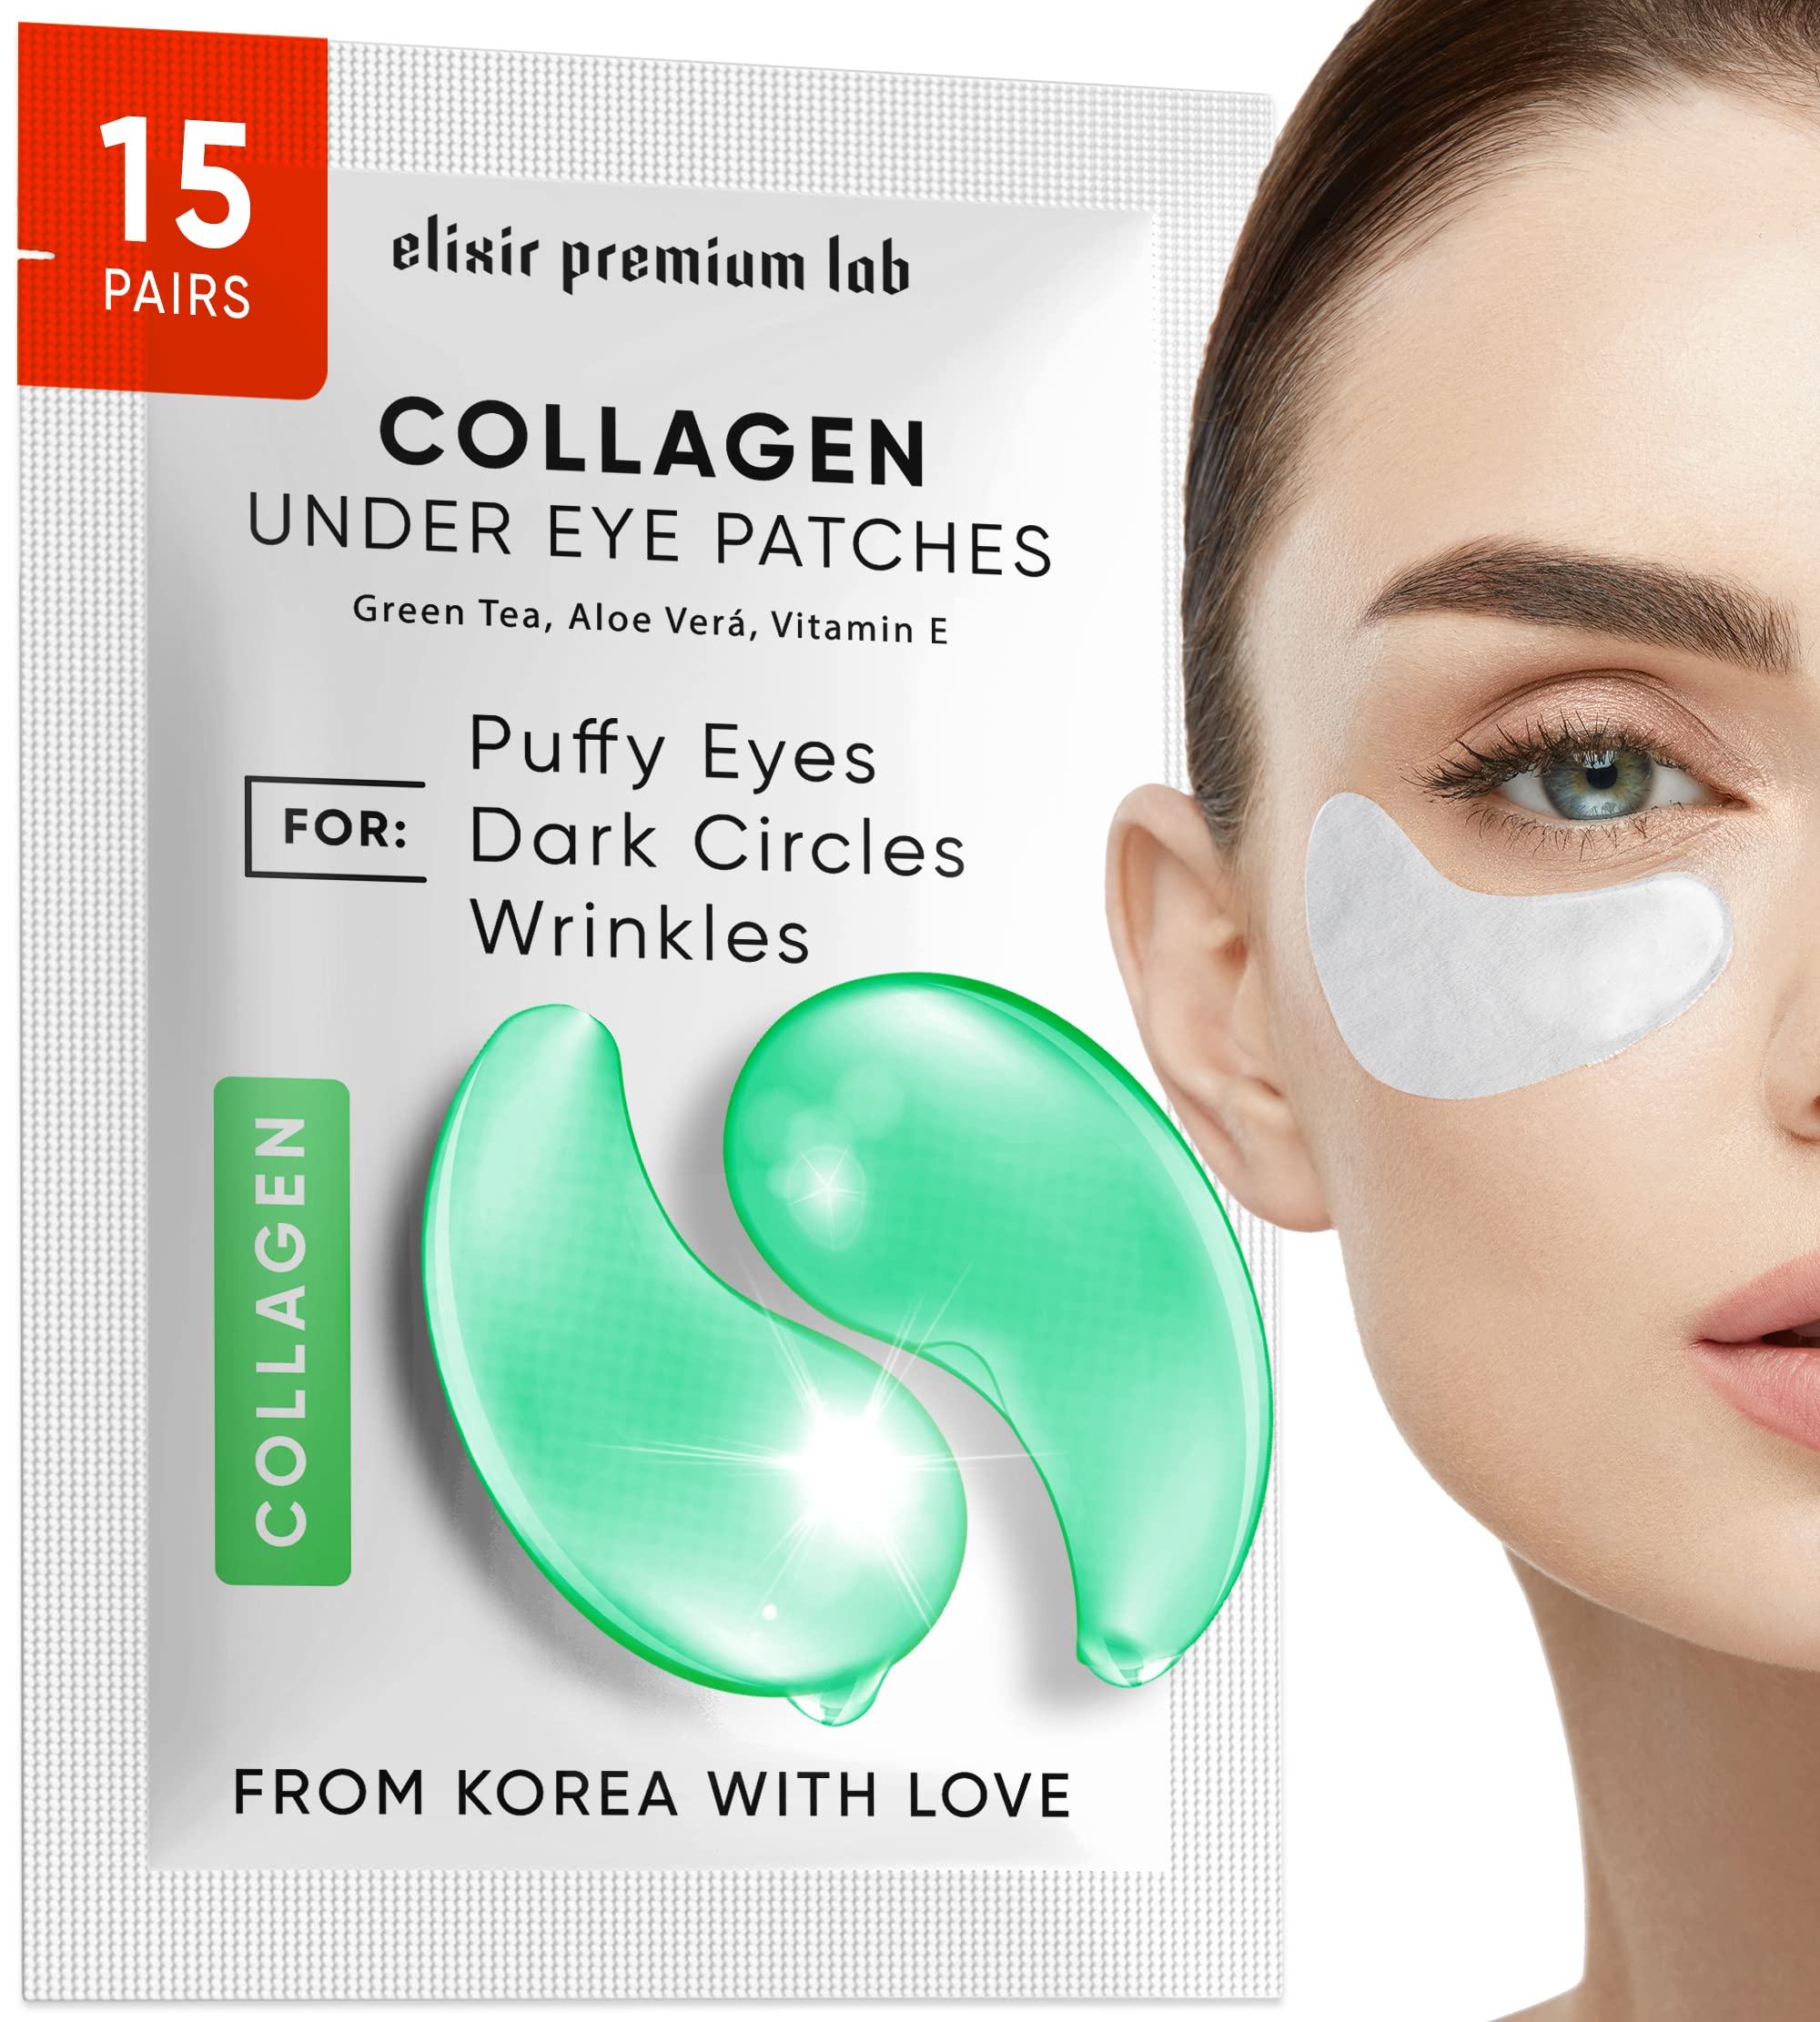 Elixir Premium Lab Collagen & Green Tea Under Eye Patches with Cooling Effect - Reduce Wrinkles, Dark Circles, and Under Eye Bags - 15 Pairs